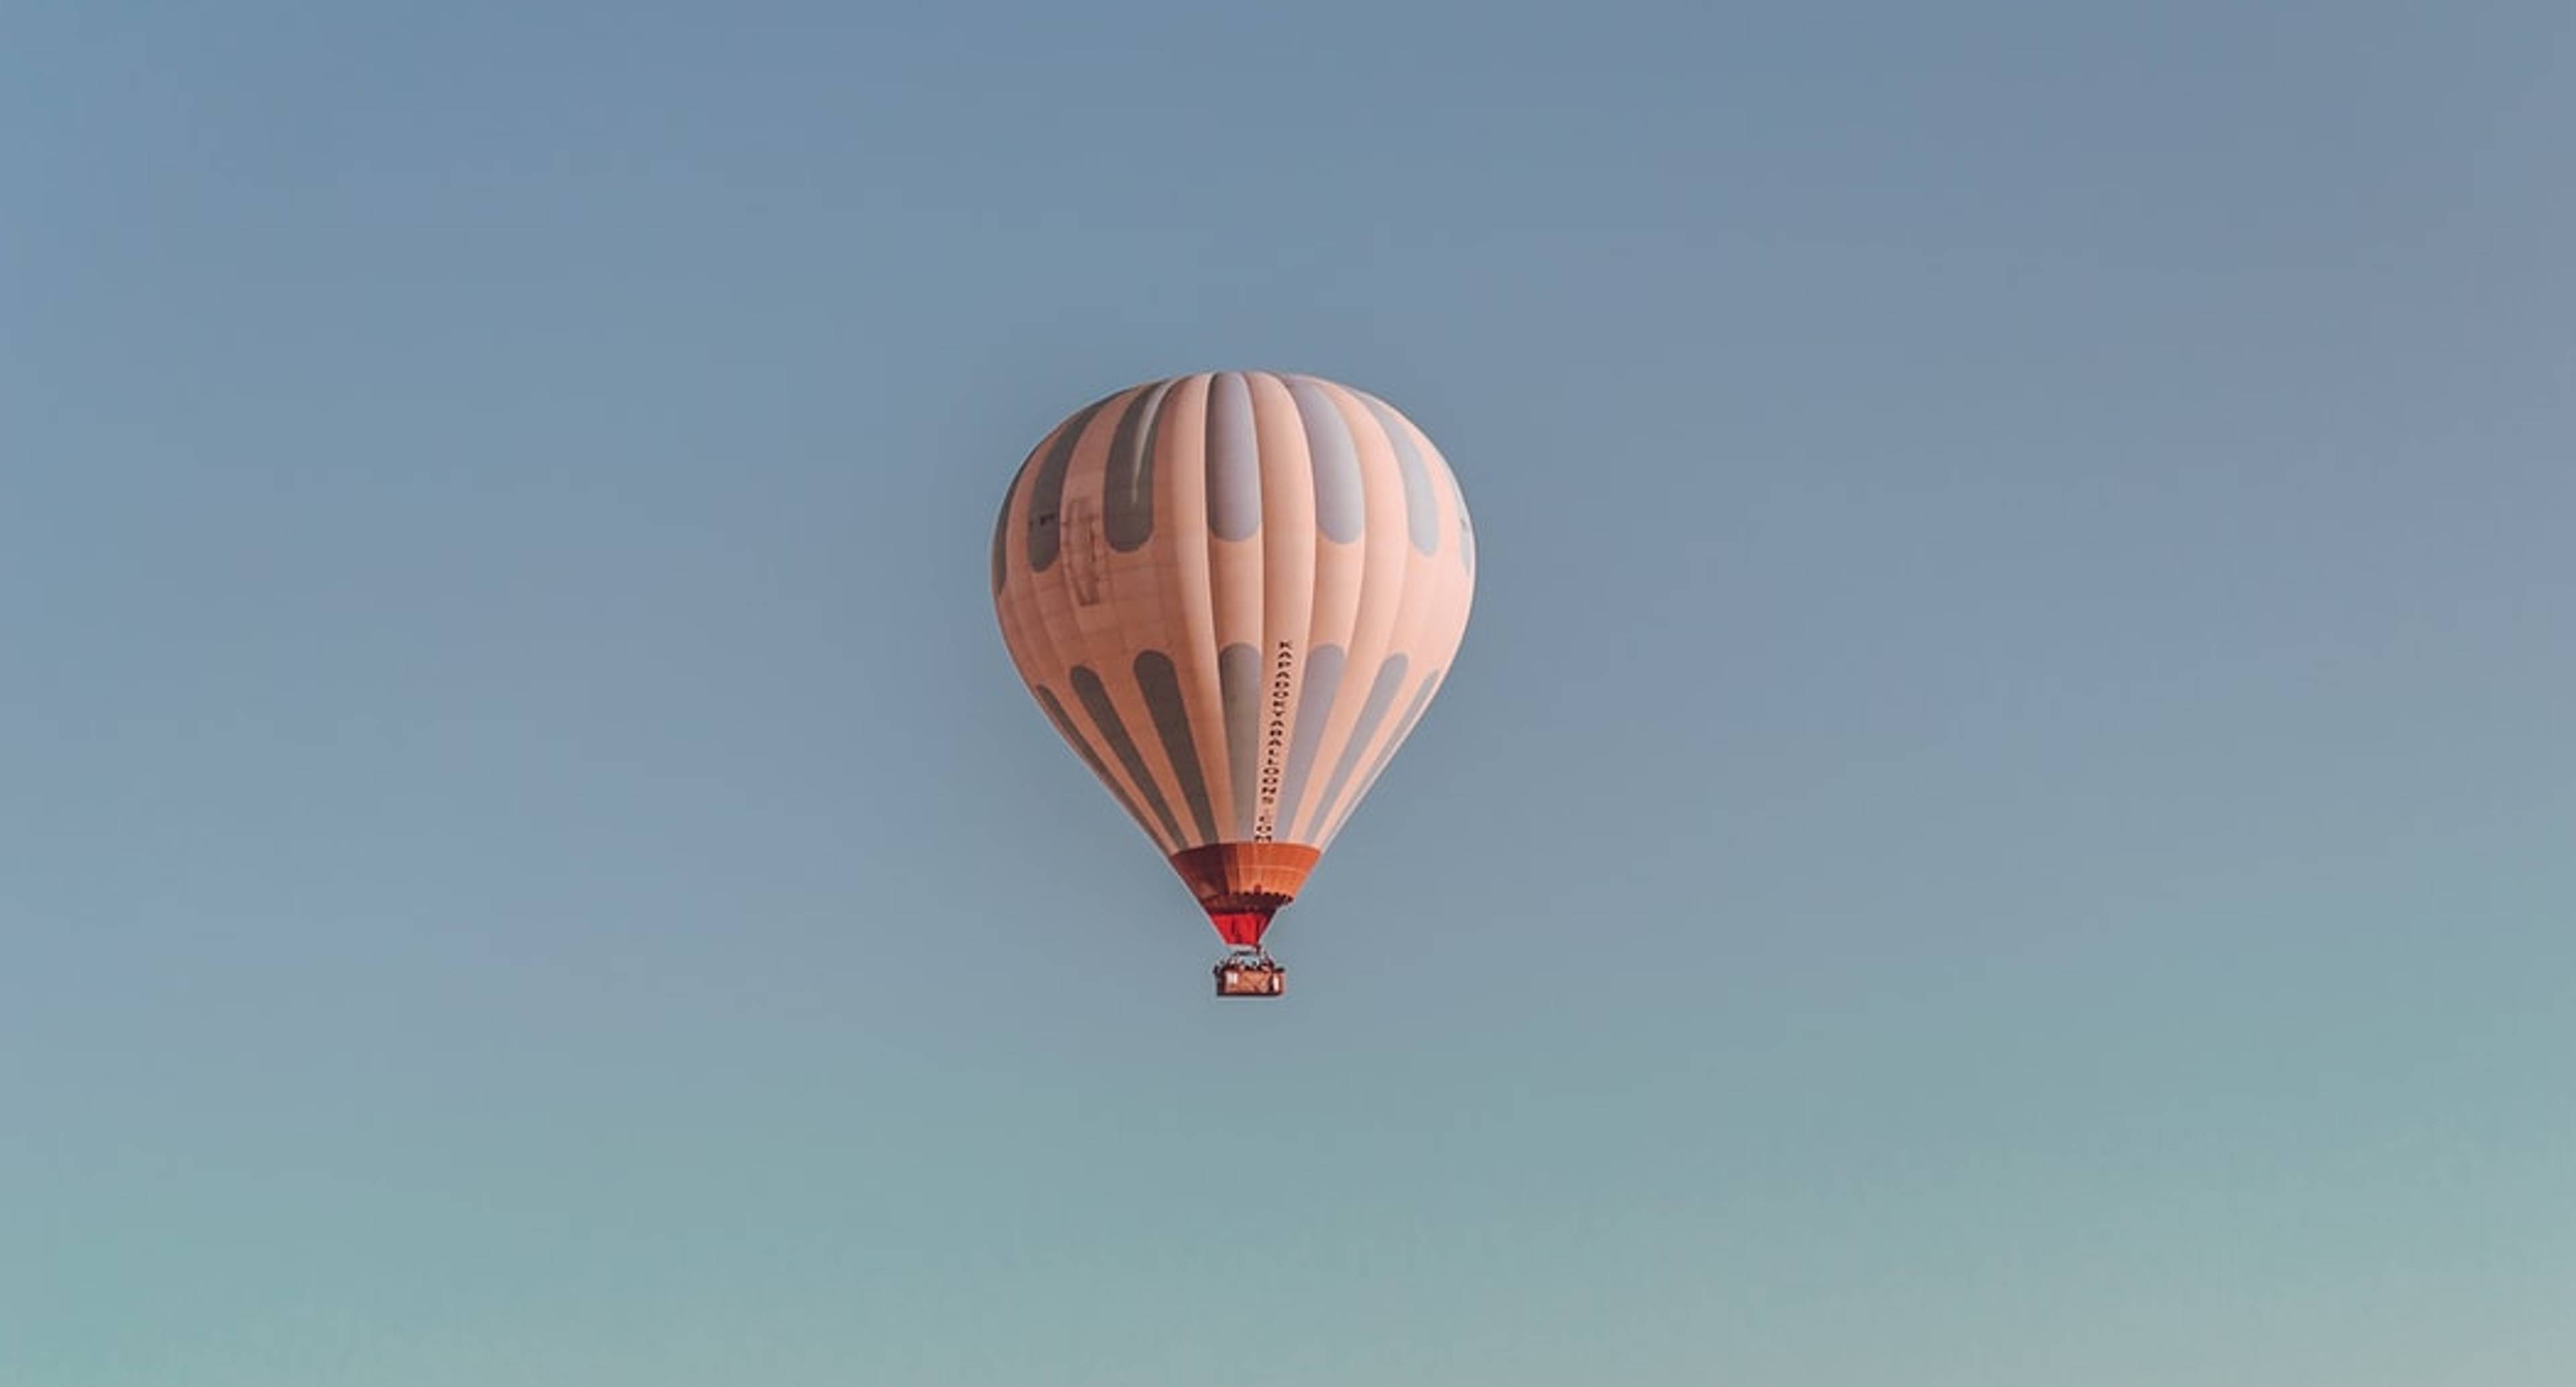 Picturesque nature and hot air ballooning